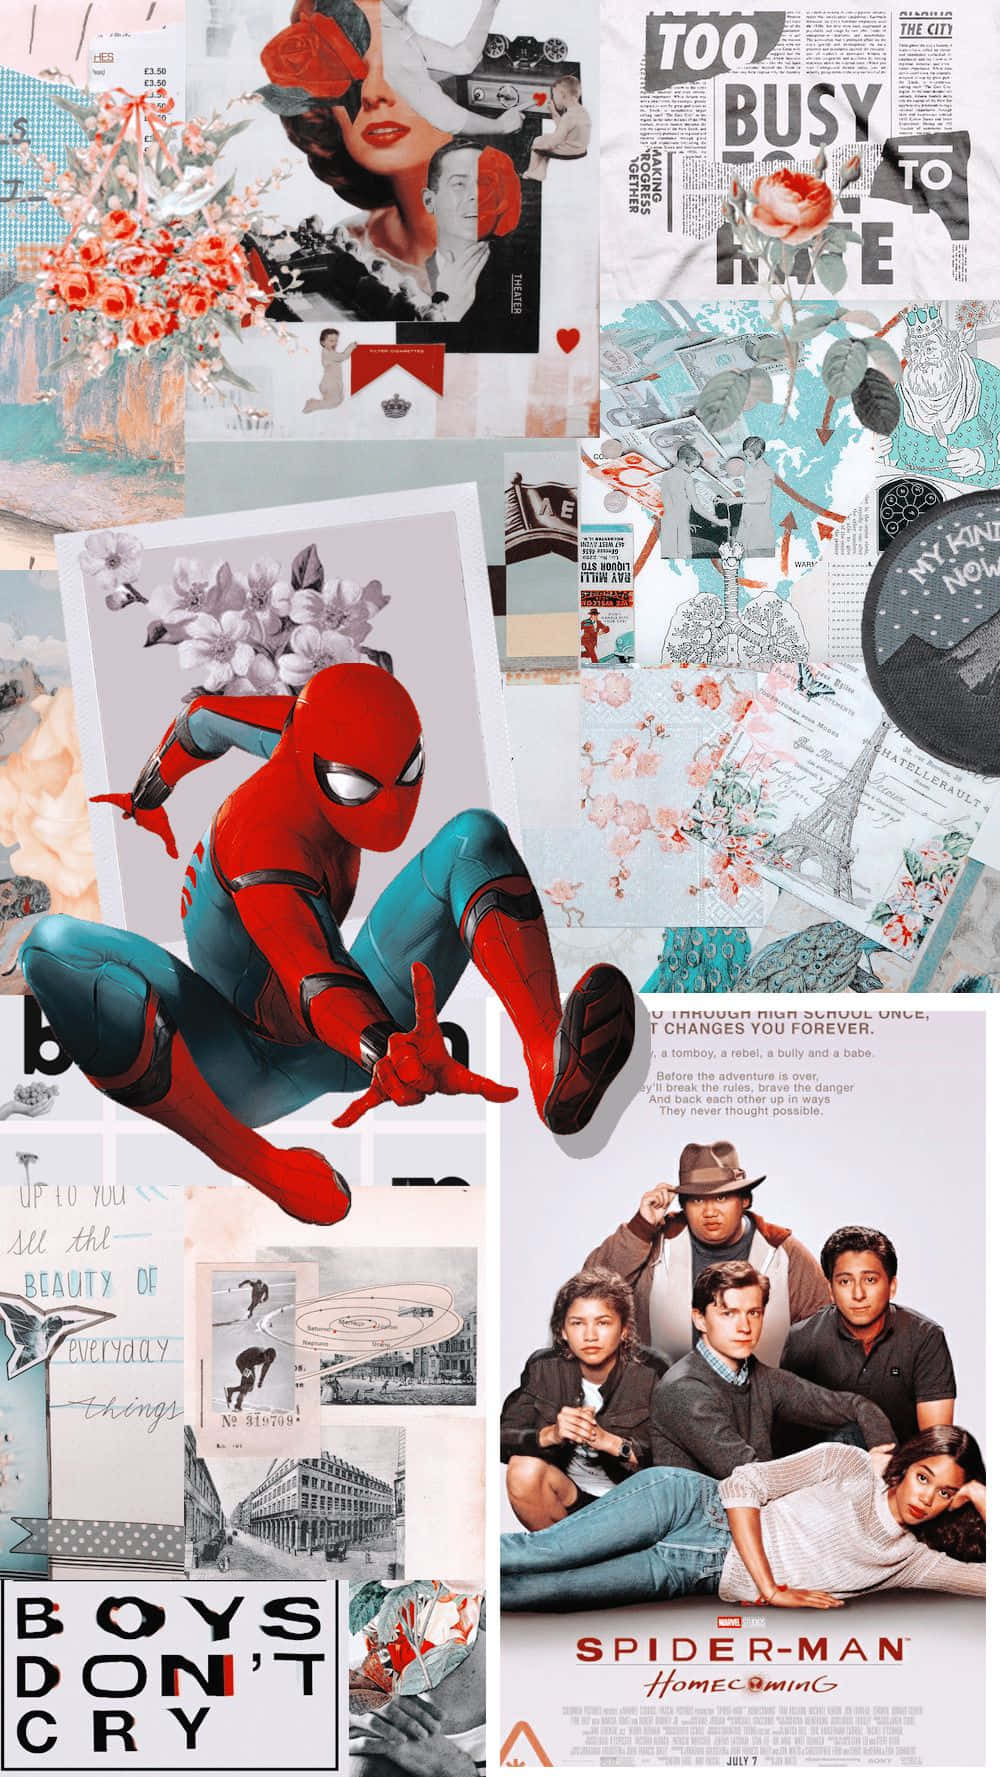 "Swing into Fun with the Spider Man Aesthetic!" Wallpaper